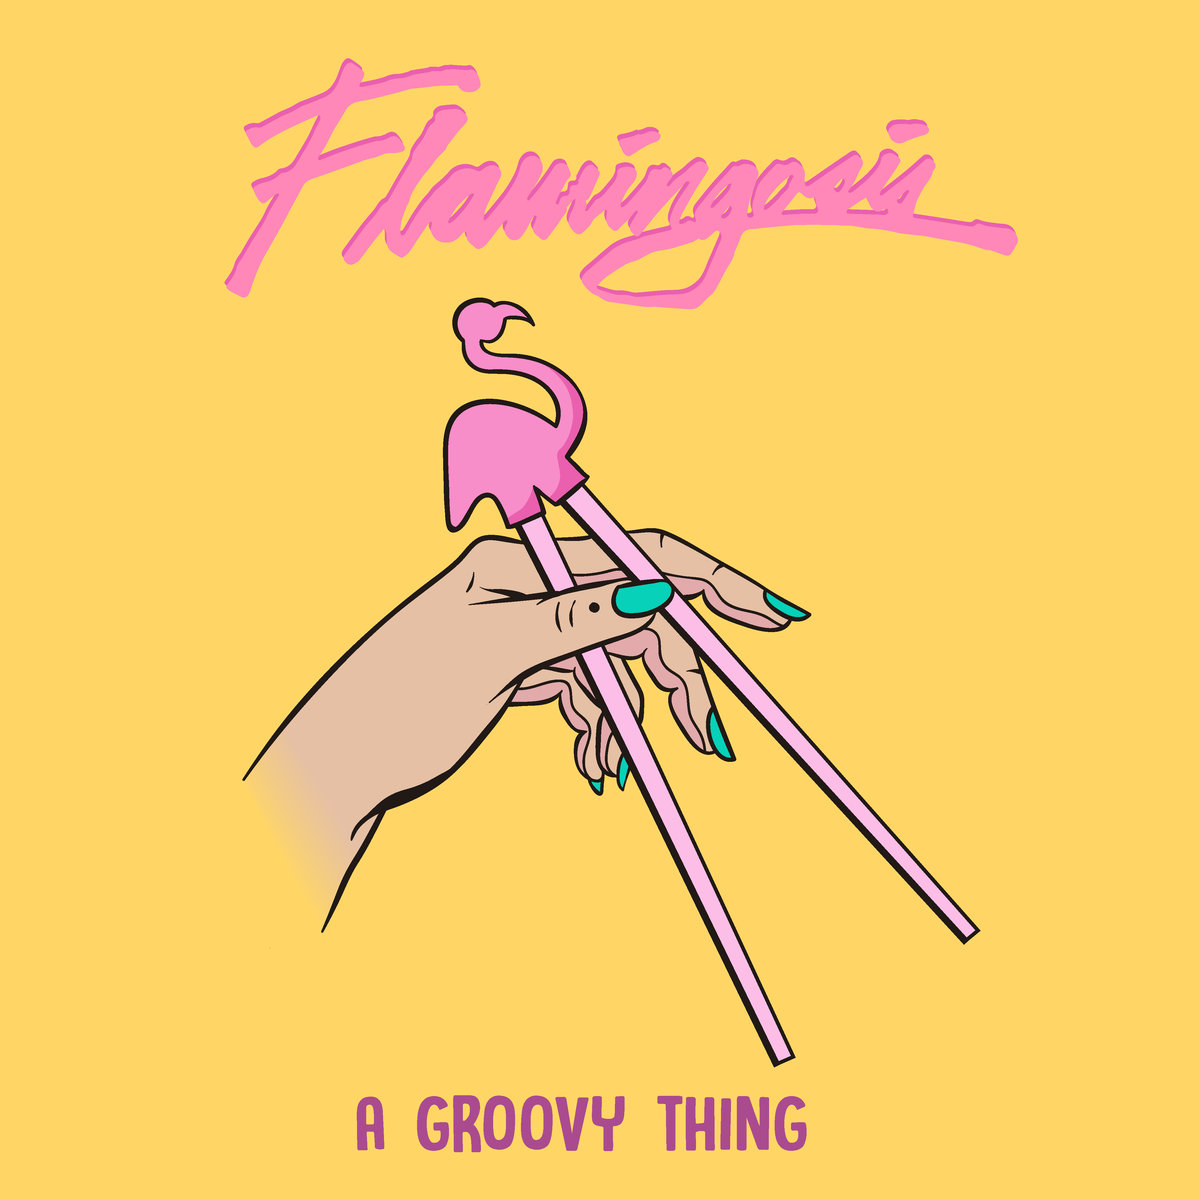 “A Groovy Thing” by Flamingosis